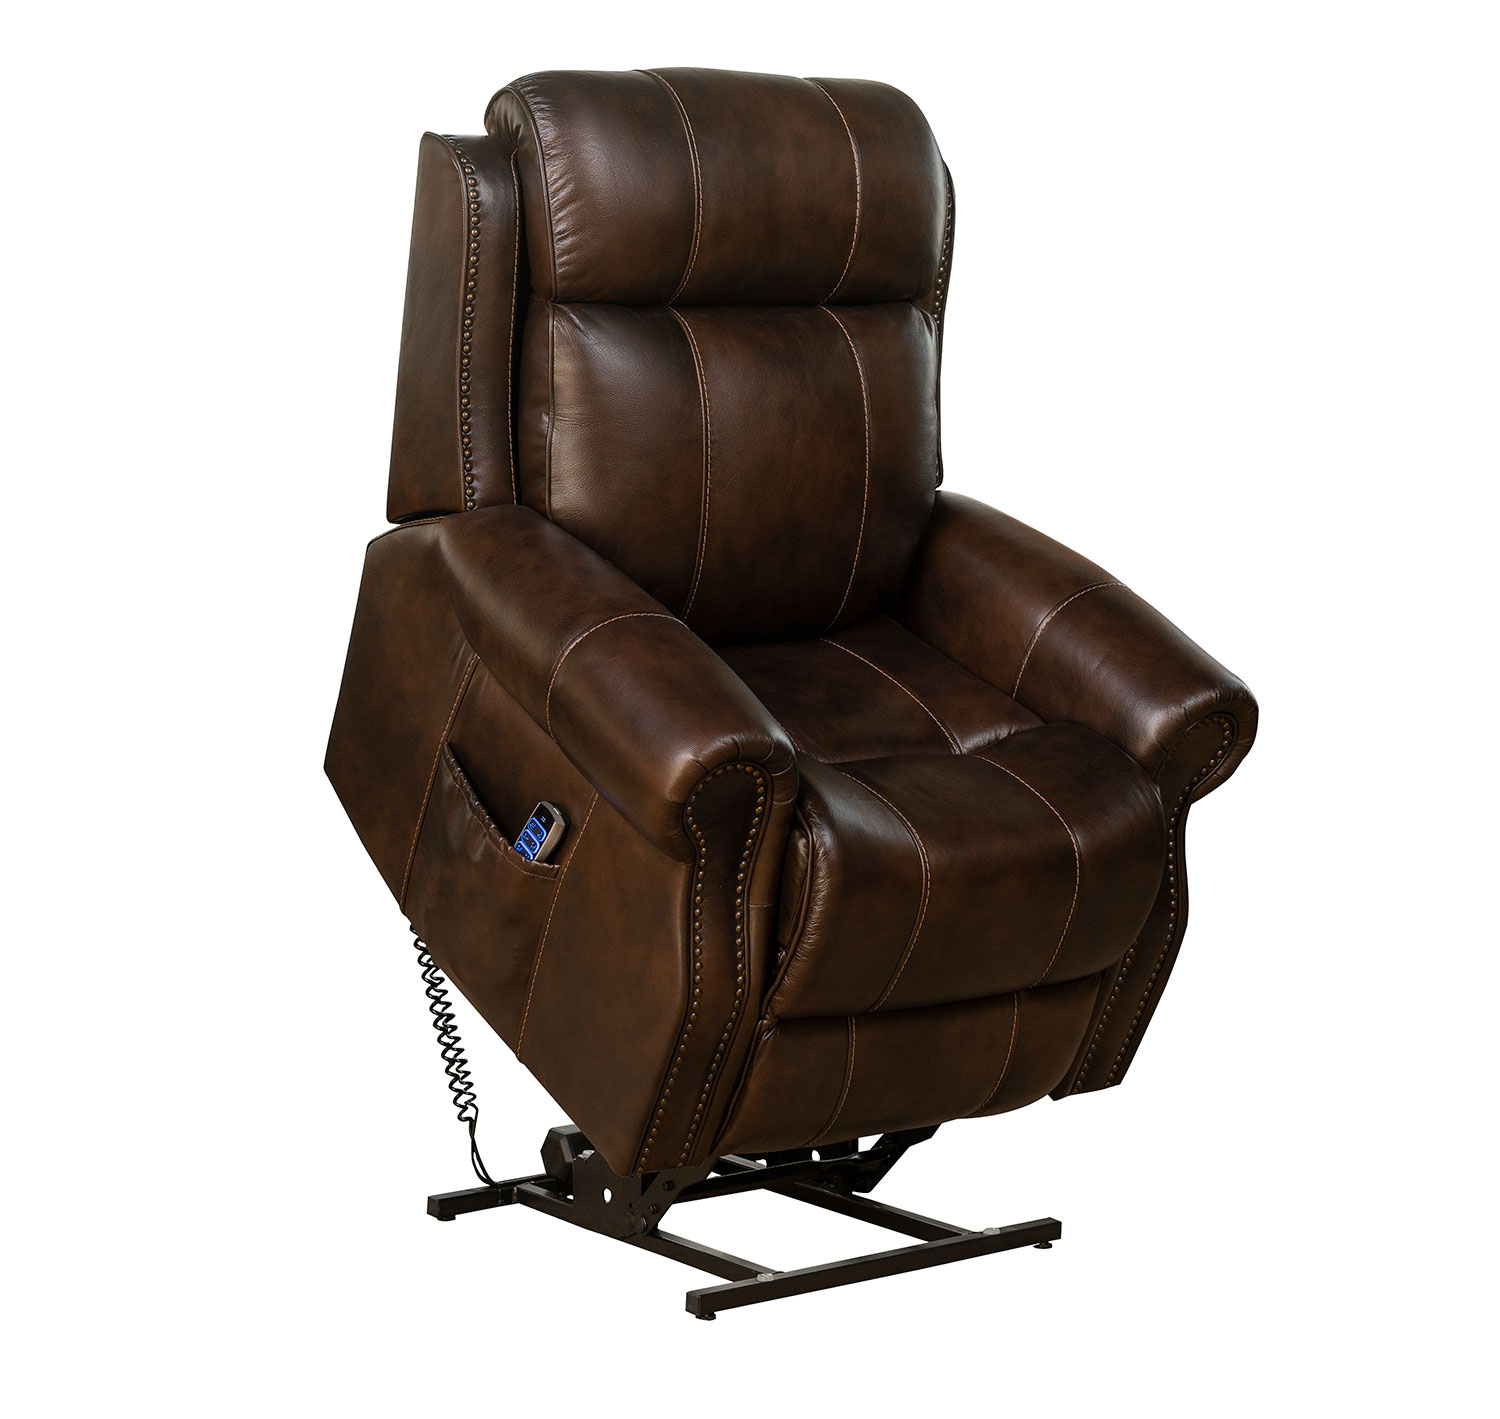 Barcalounger Langston Lift Chair Recliner with Power Head Rest and Lumbar - Tonya Brown/Leather Match